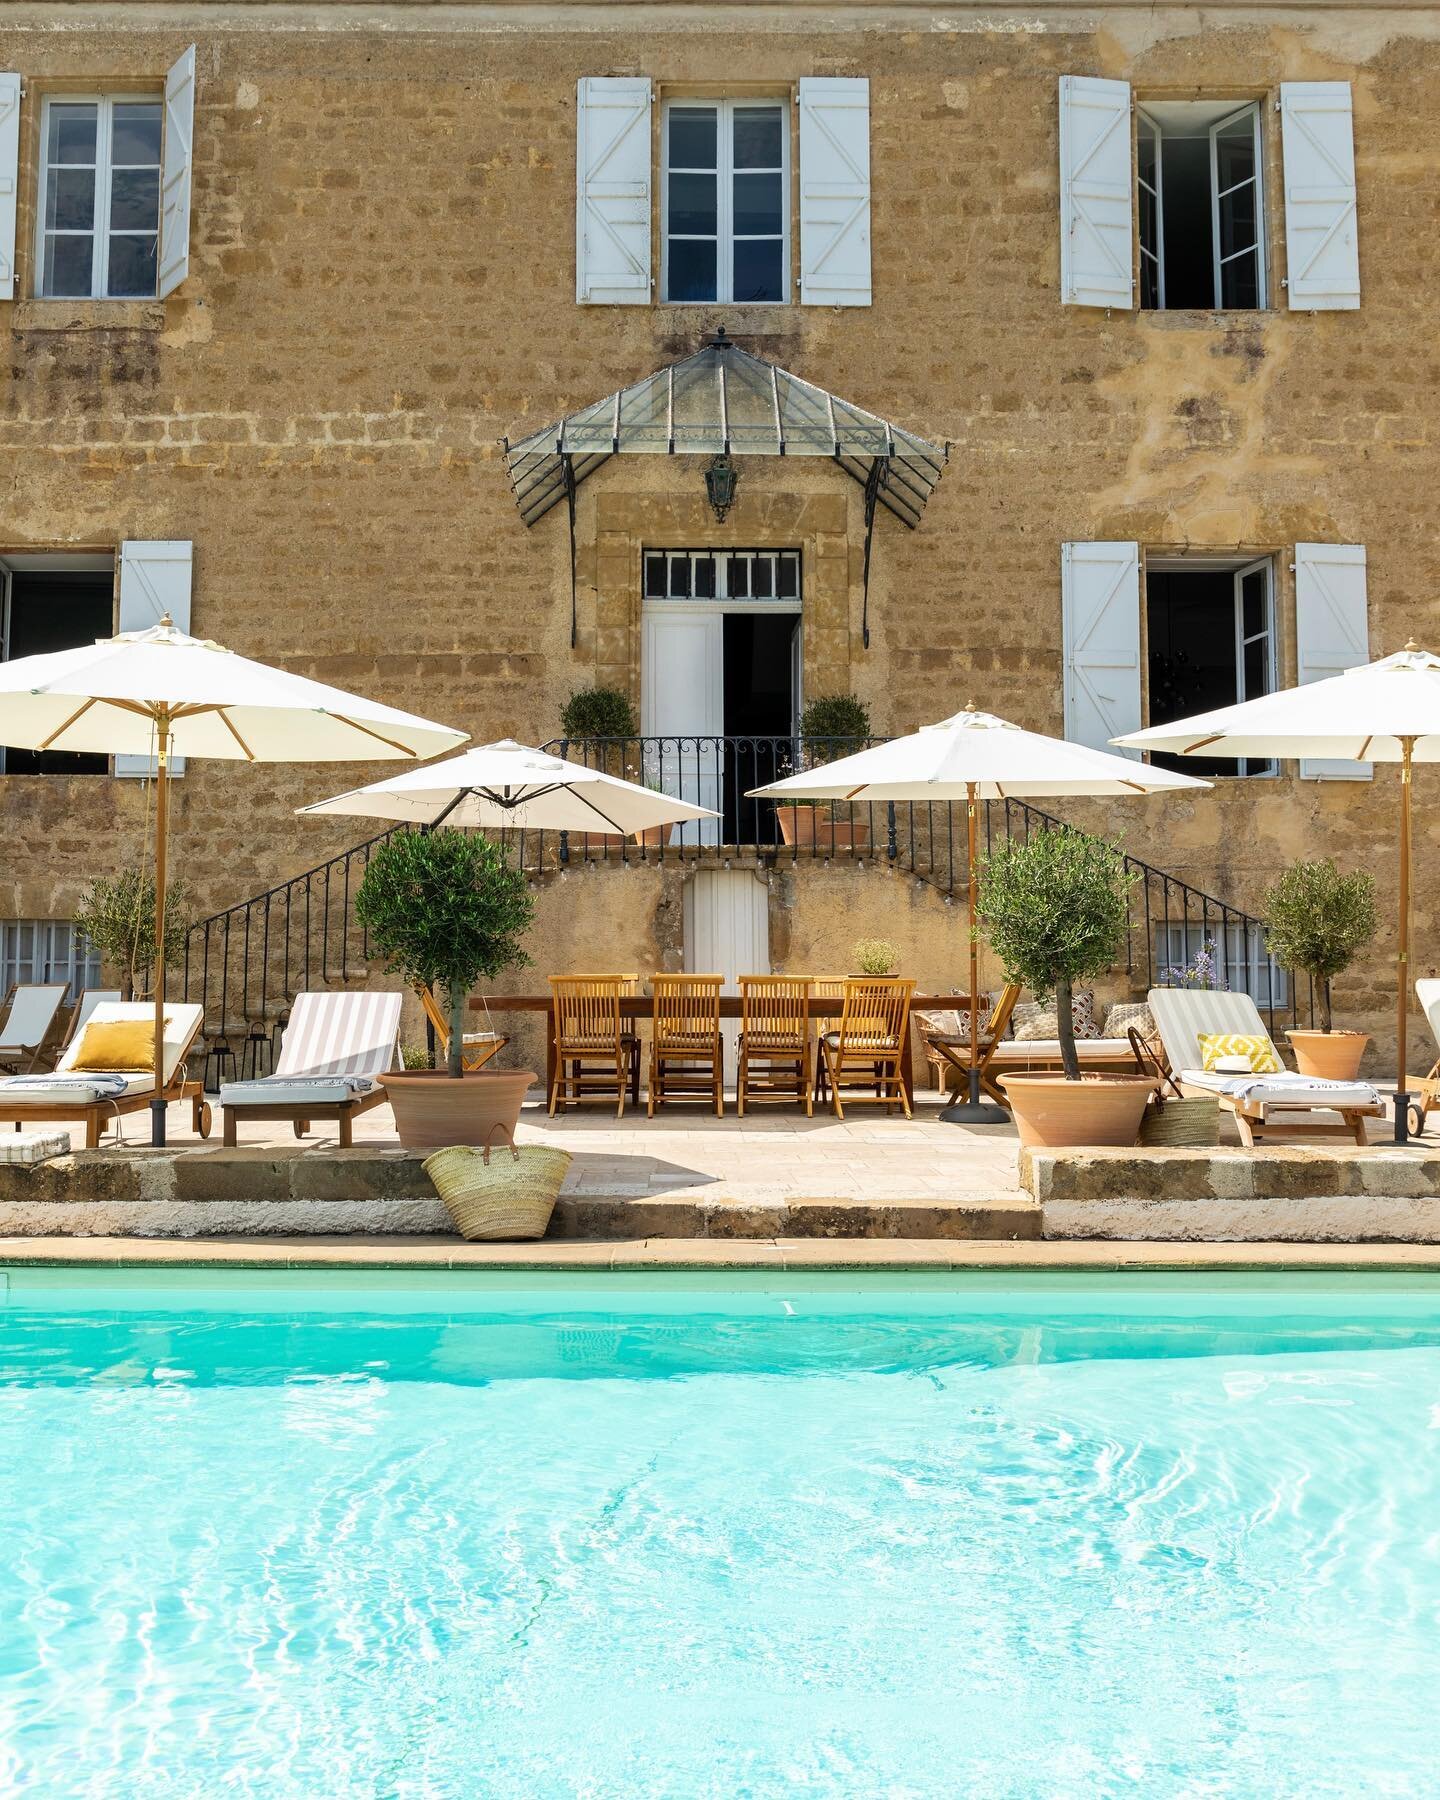 &ldquo;So picture perfect you will book a stay&hellip;&rdquo; 

@dailymail 

We are still taking bookings for &lsquo;23 and beyond so reach out privately to discuss your next getaway! ☀️

@chateaulabarthe 
&hellip;&hellip;&hellip;&hellip;&hellip;&hel